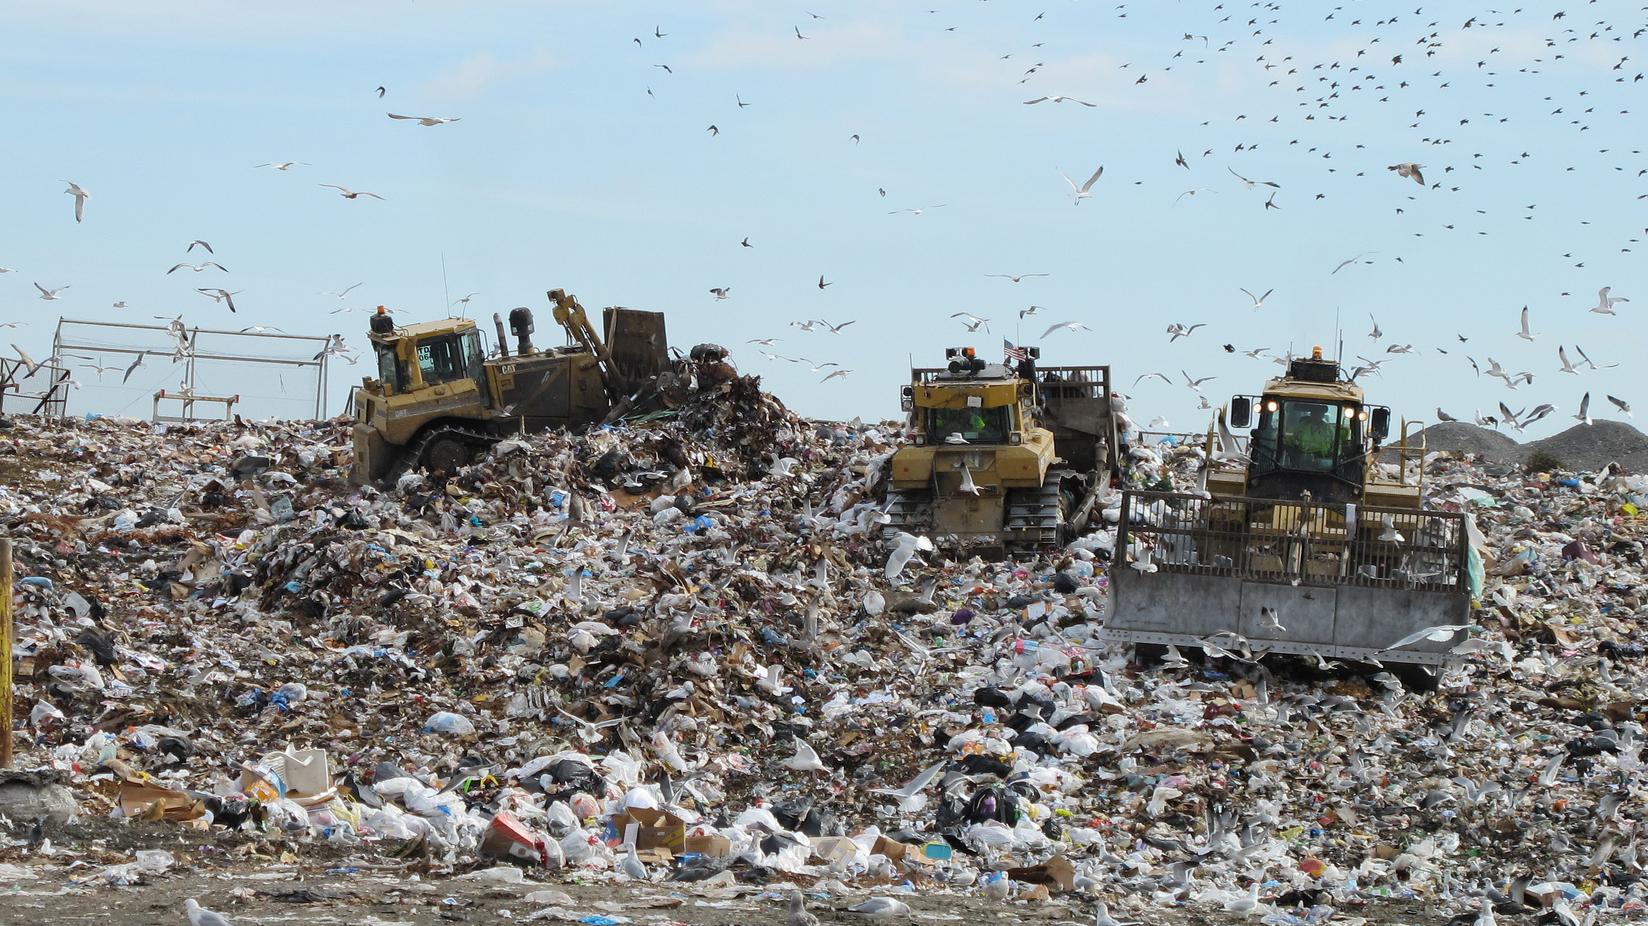 The Old Dominion landfill in Virginia. Photo by Bill McChesney/flickr/CC BY 2.0